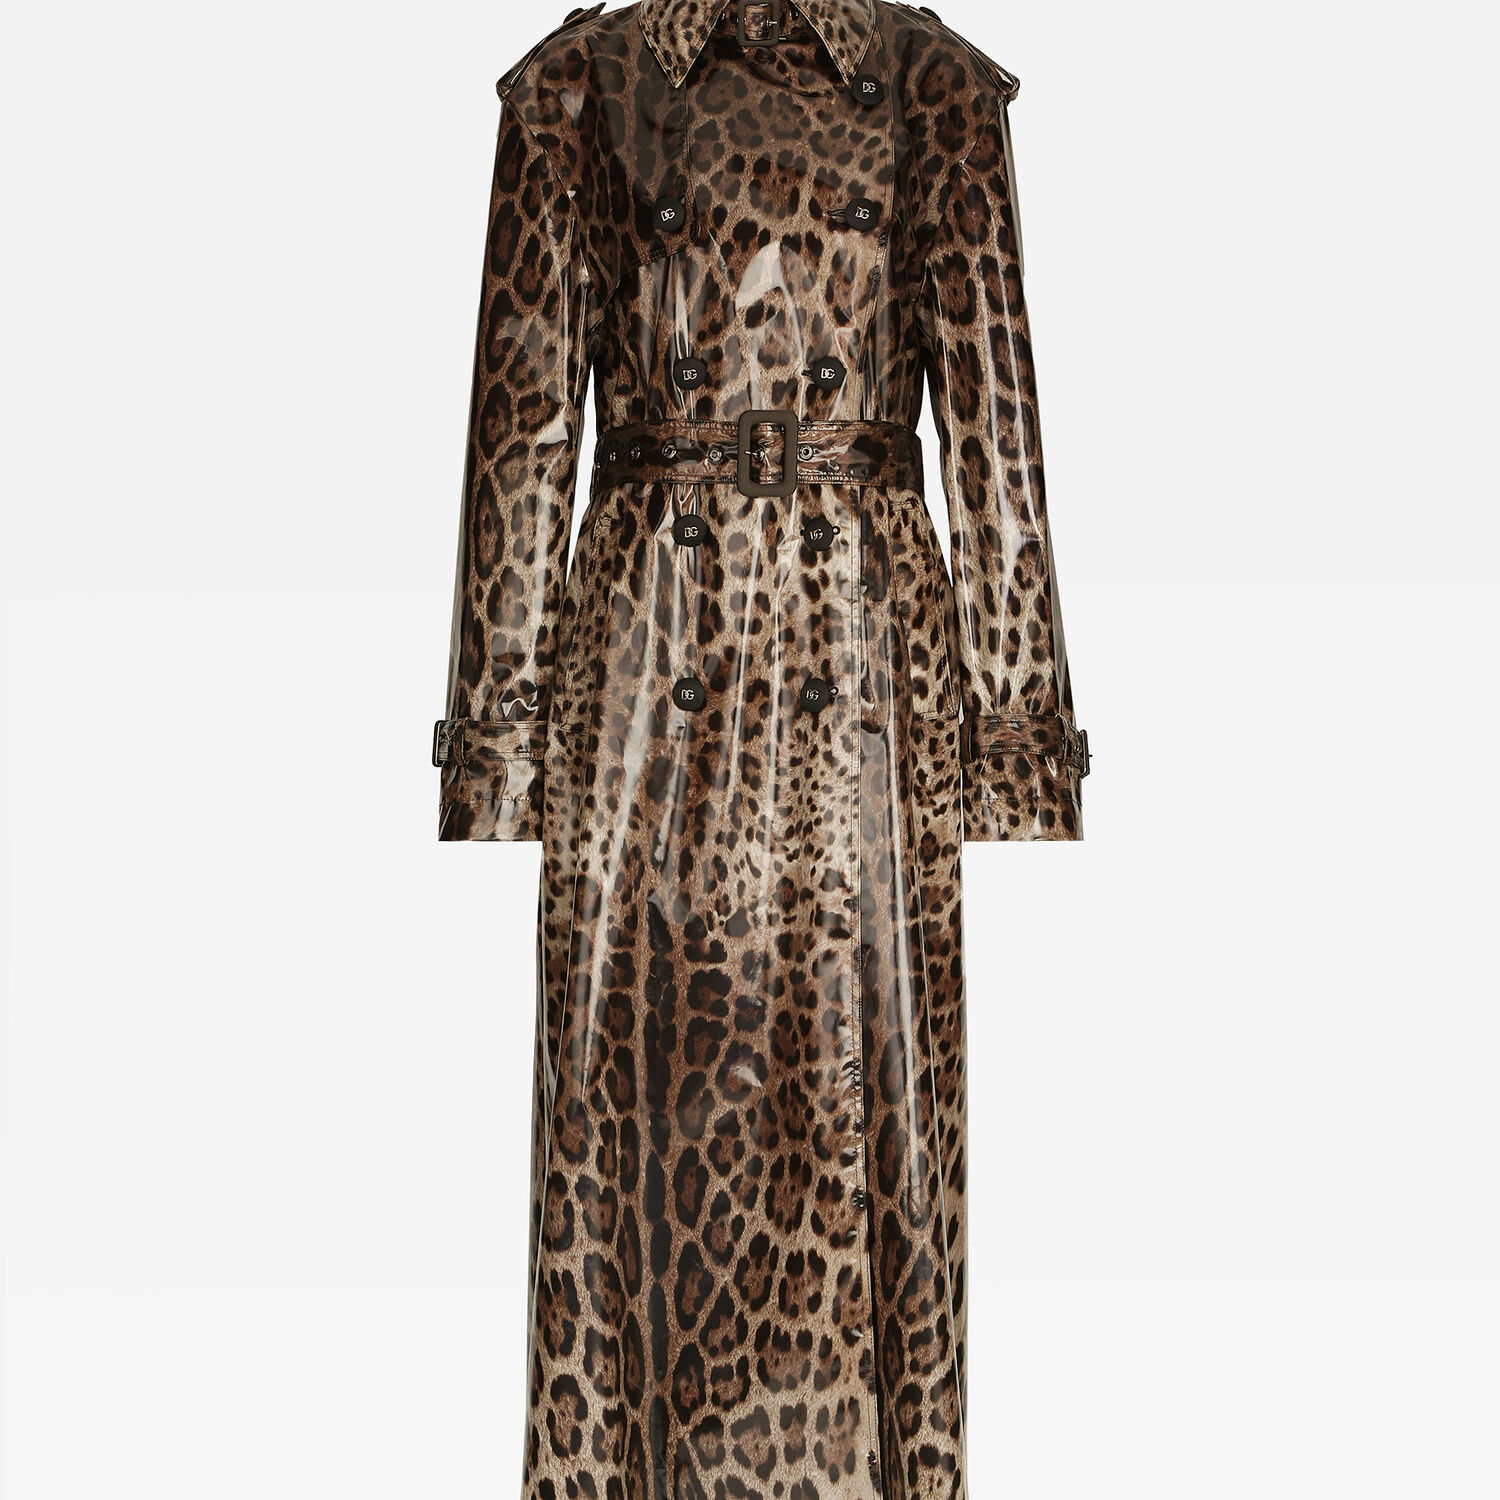 IEQJ British Leopard Printed Pu Leather Trench Coat For Women